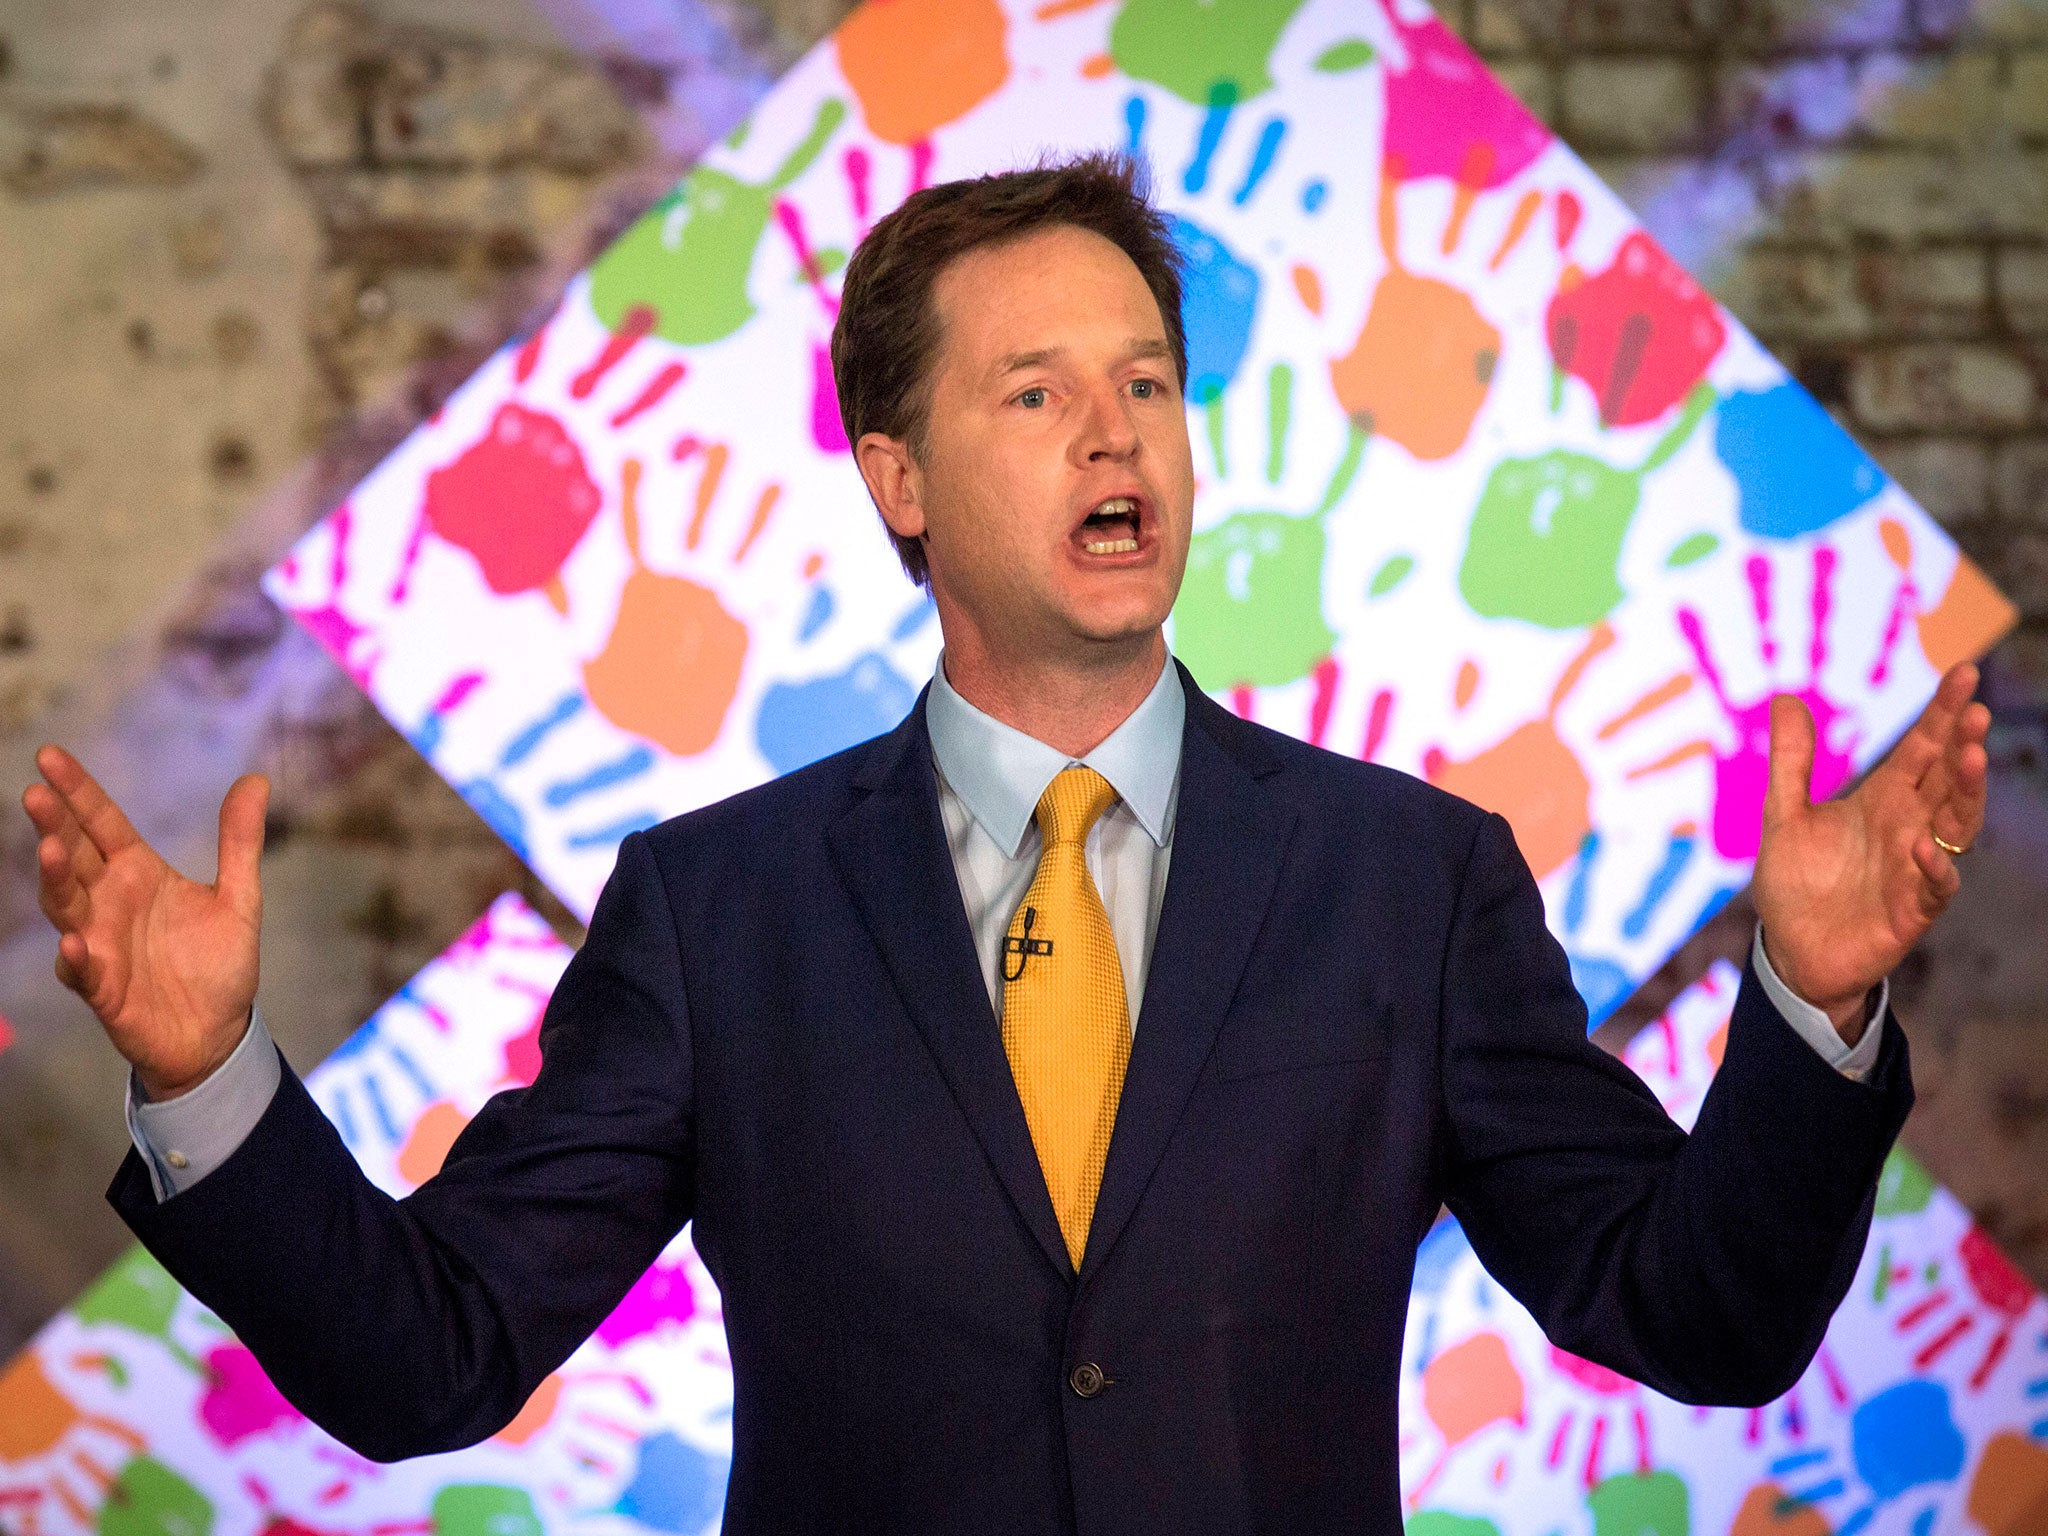 Nick Clegg speaking at the launch of his party's manifesto for the 2015 general election in Battersea, London